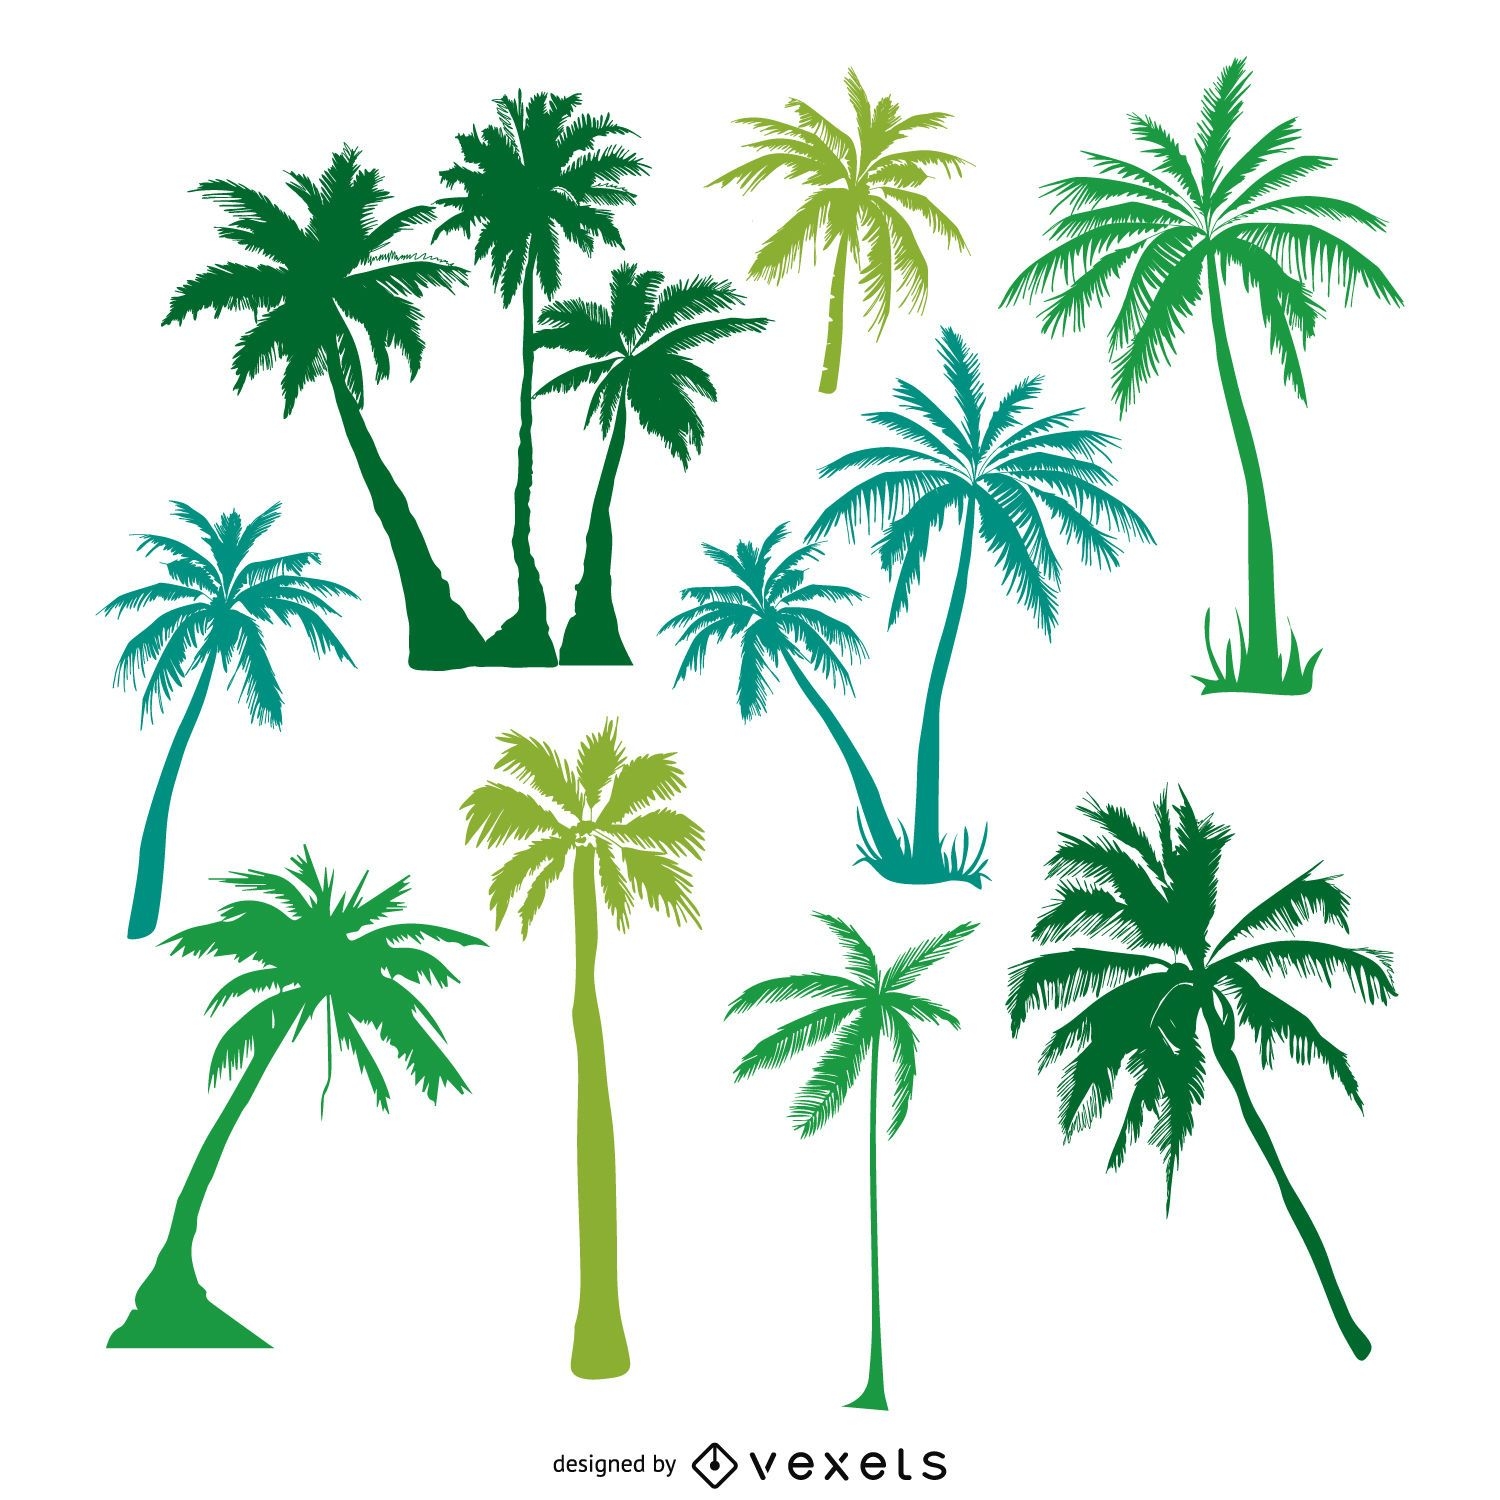 Green palm trees silhouettes